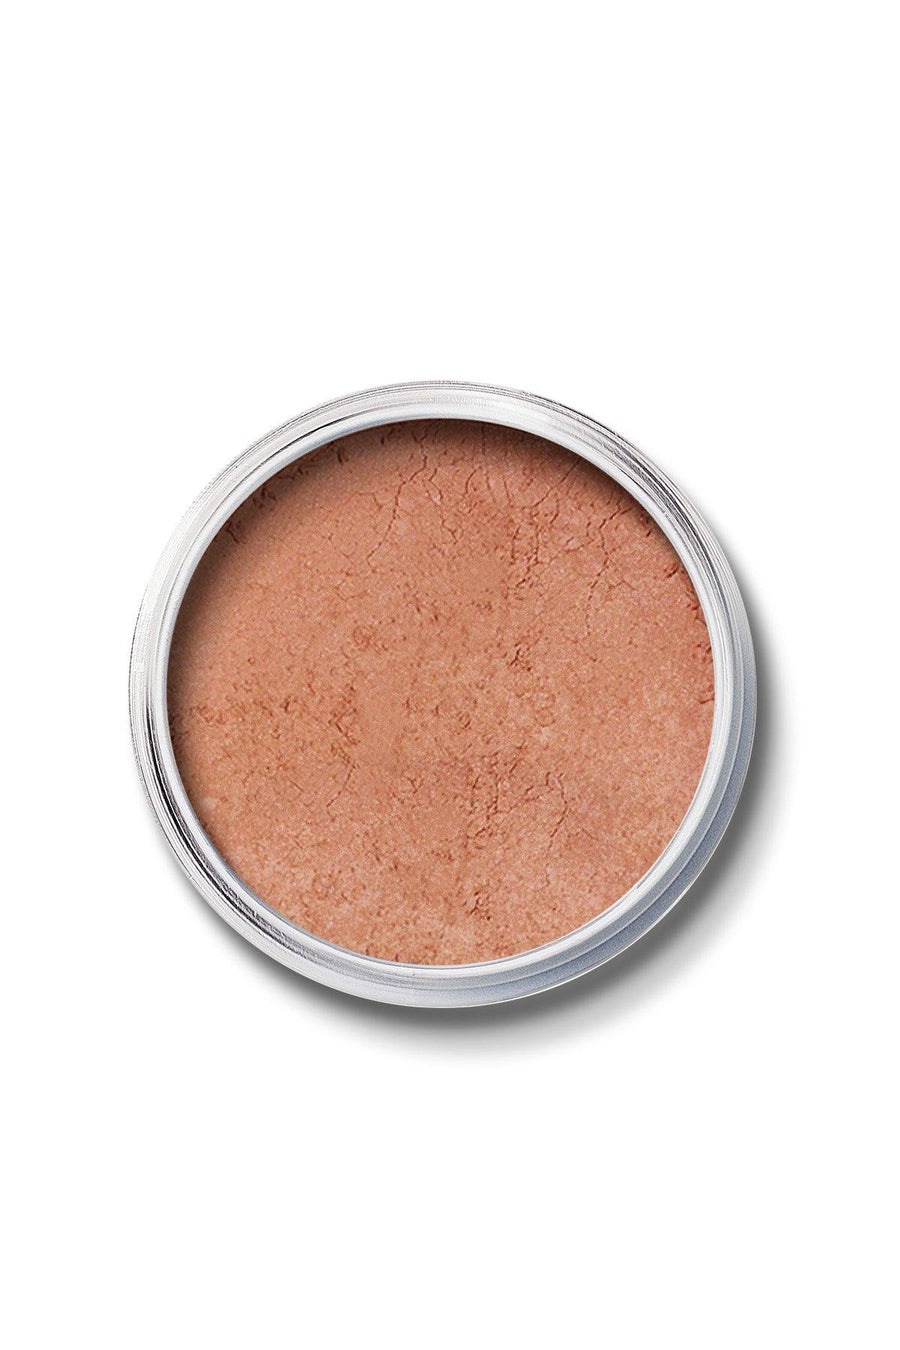 Mineral Blush #4 - Dusty Rose - Blend Mineral Cosmetics